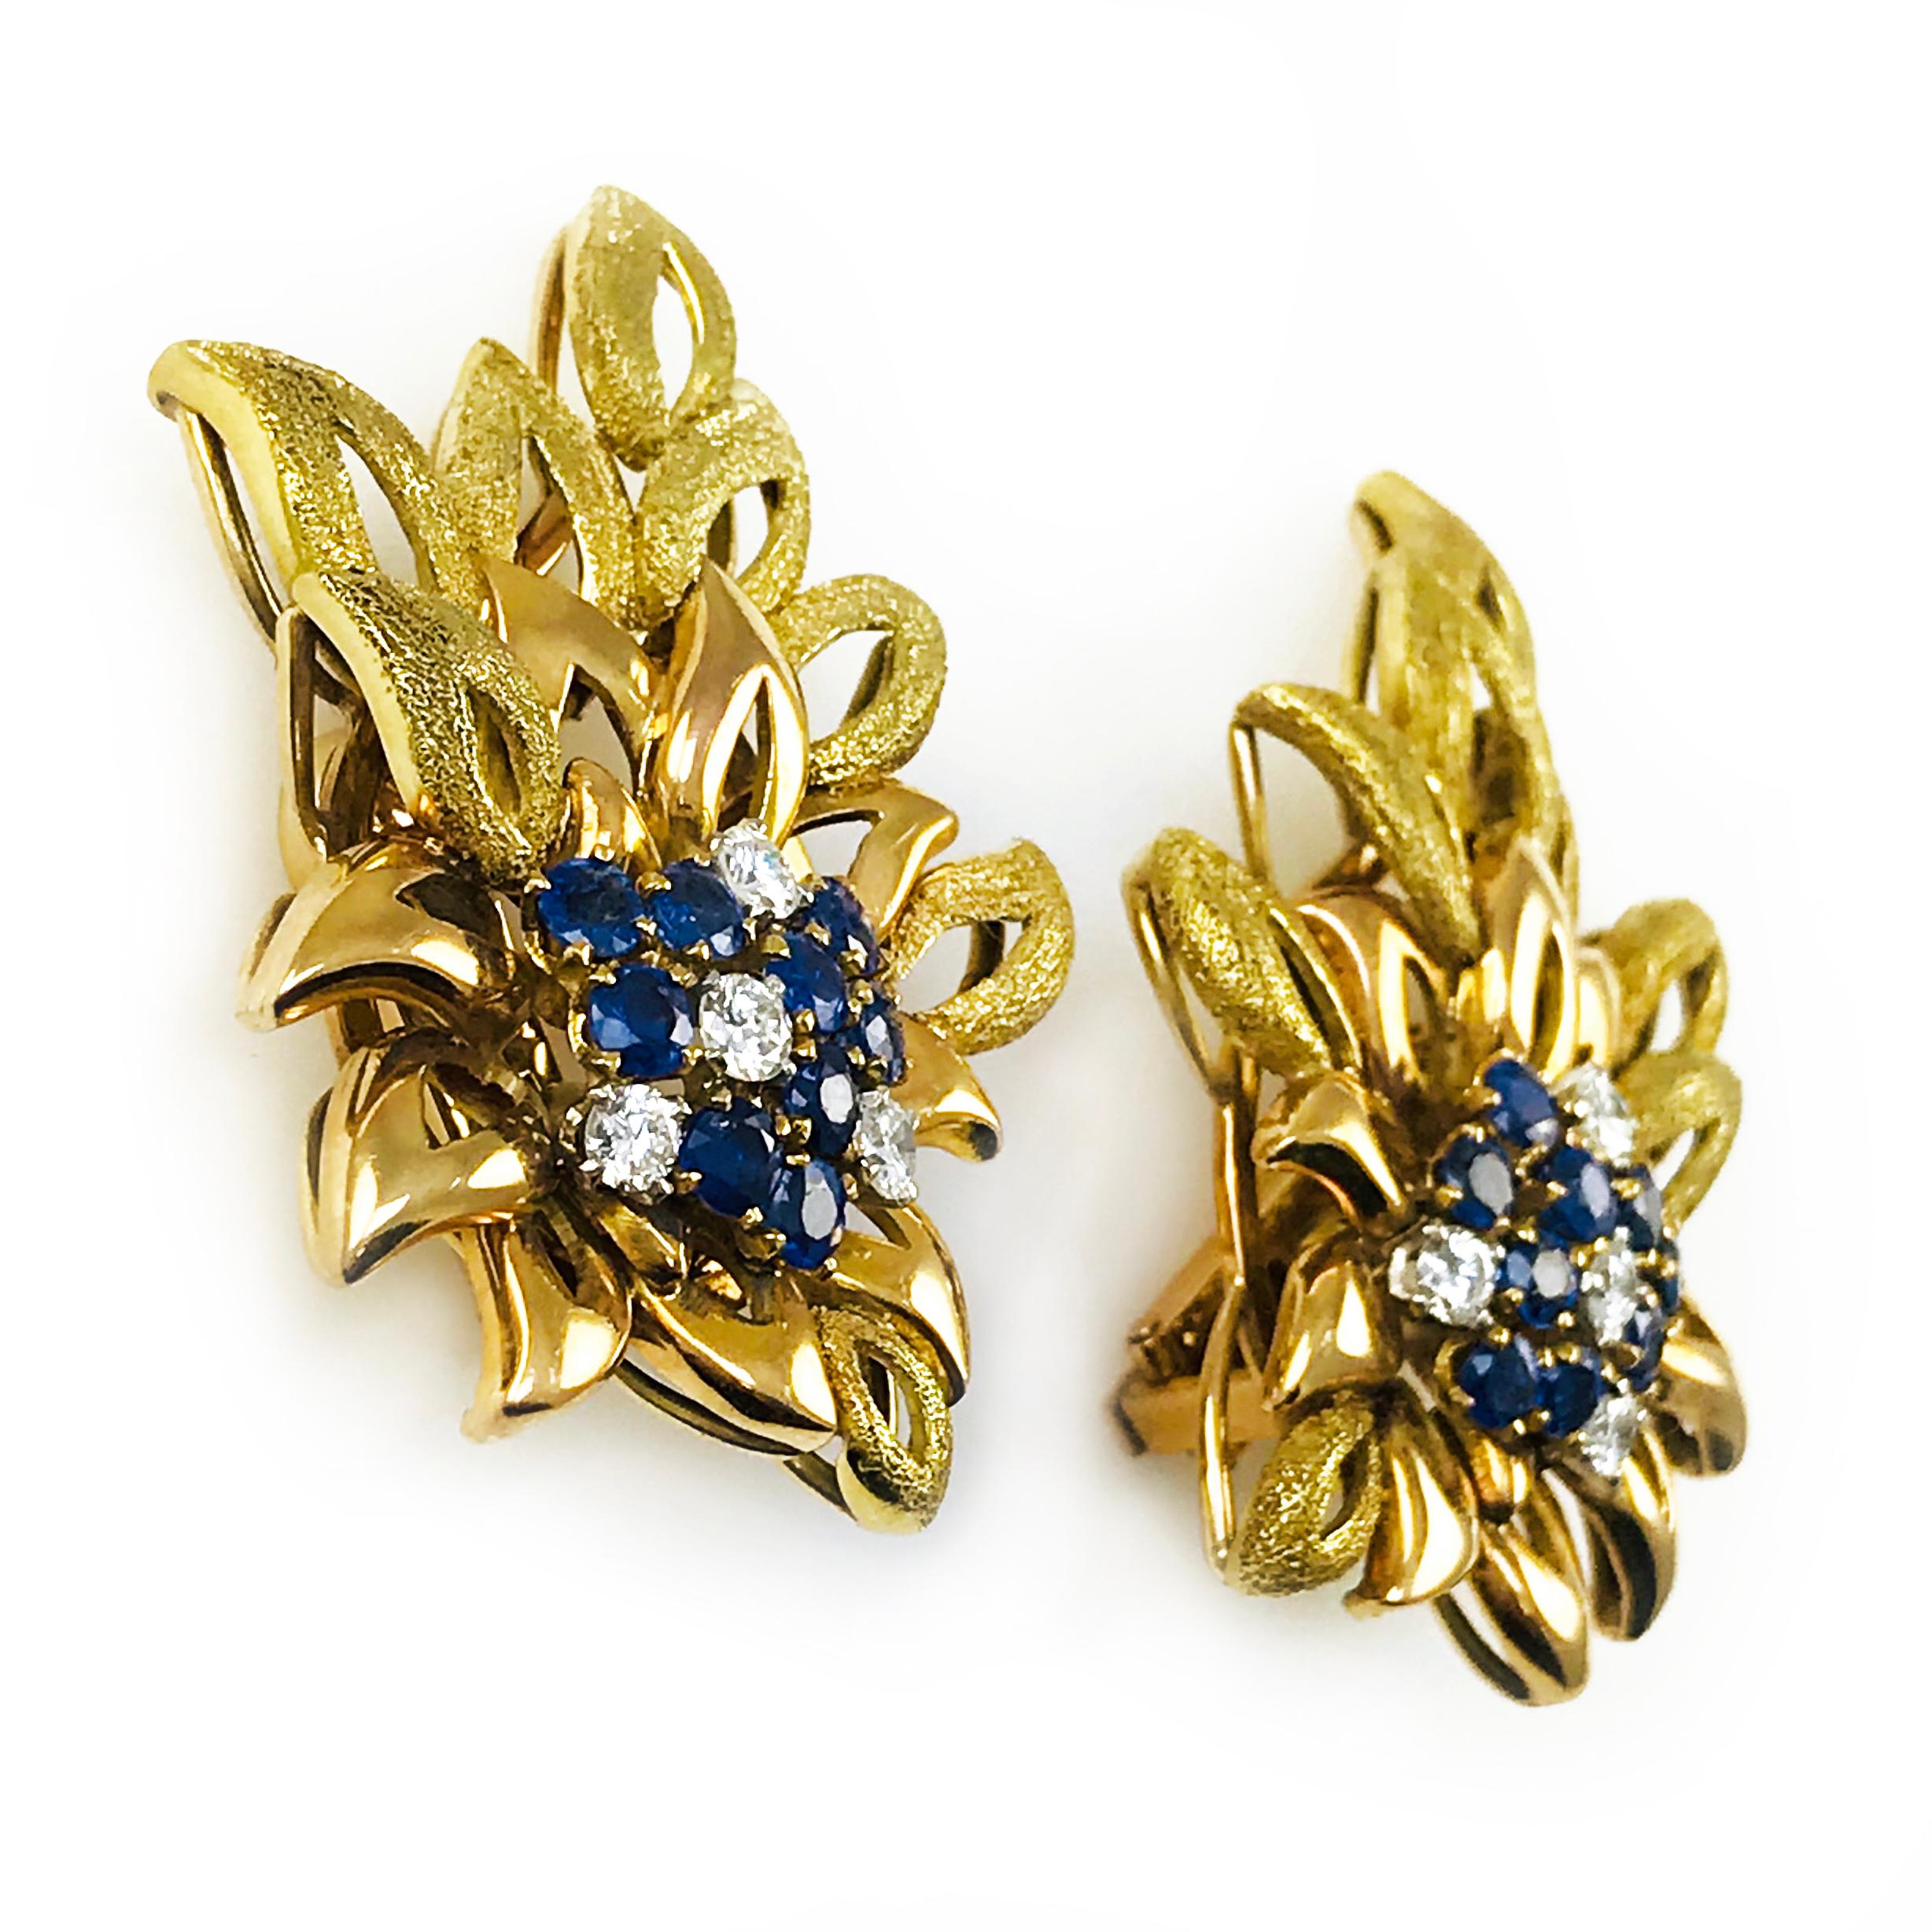 14 Karat Rose and Yellow Gold Flower-Shaped Natural Blue Sapphire Diamond Clip-on Earrings. Four round diamonds and nine-round blue sapphires adorn each of these beautiful earrings. The individual flower petal outlines are smooth closest to the